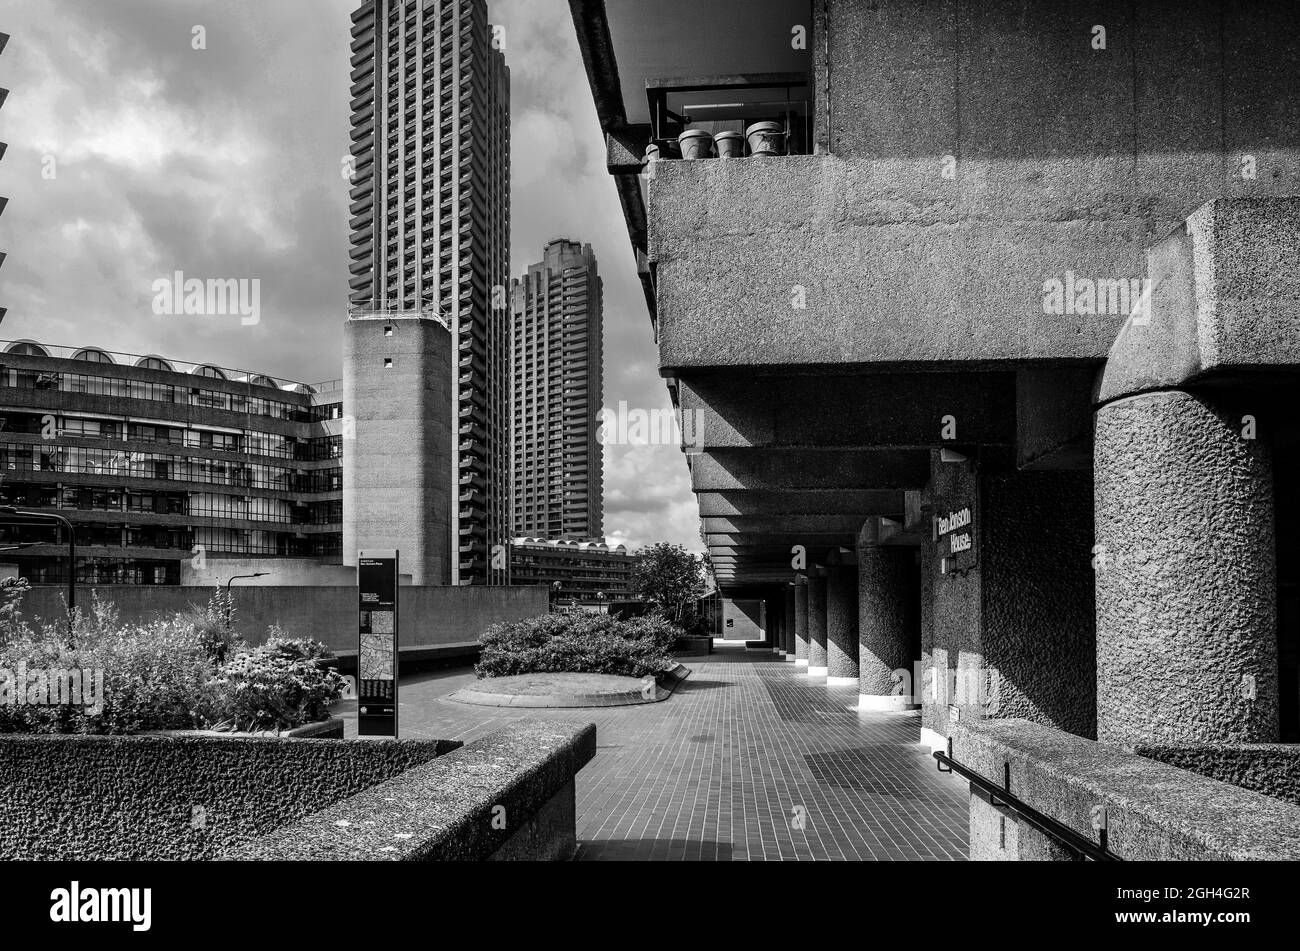 Views of the Barbican Centre brutalist architecture in London EC2 England UK Stock Photo